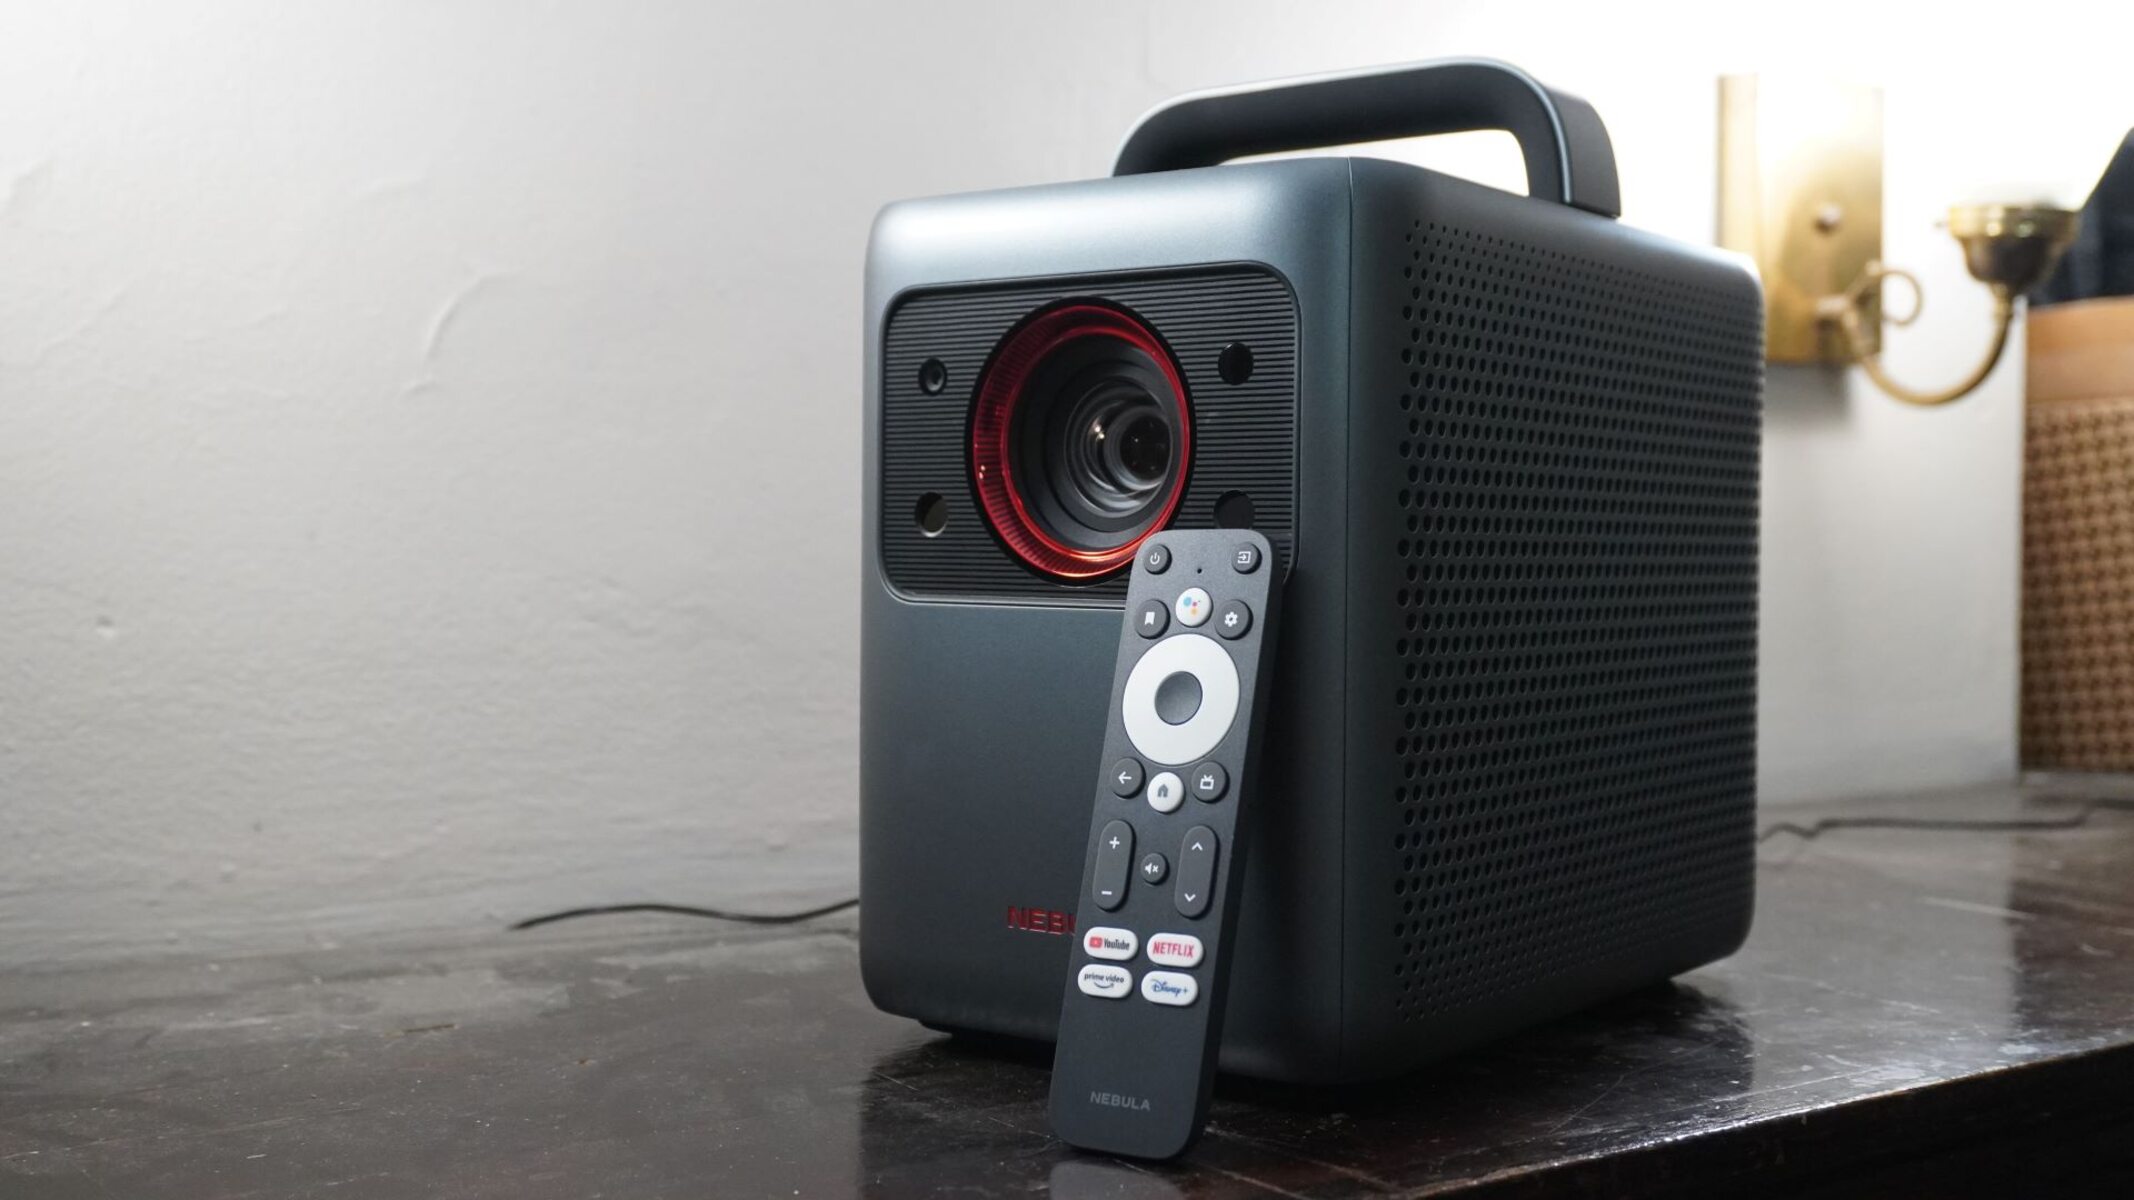 How To Connect Phone To Nebula Projector